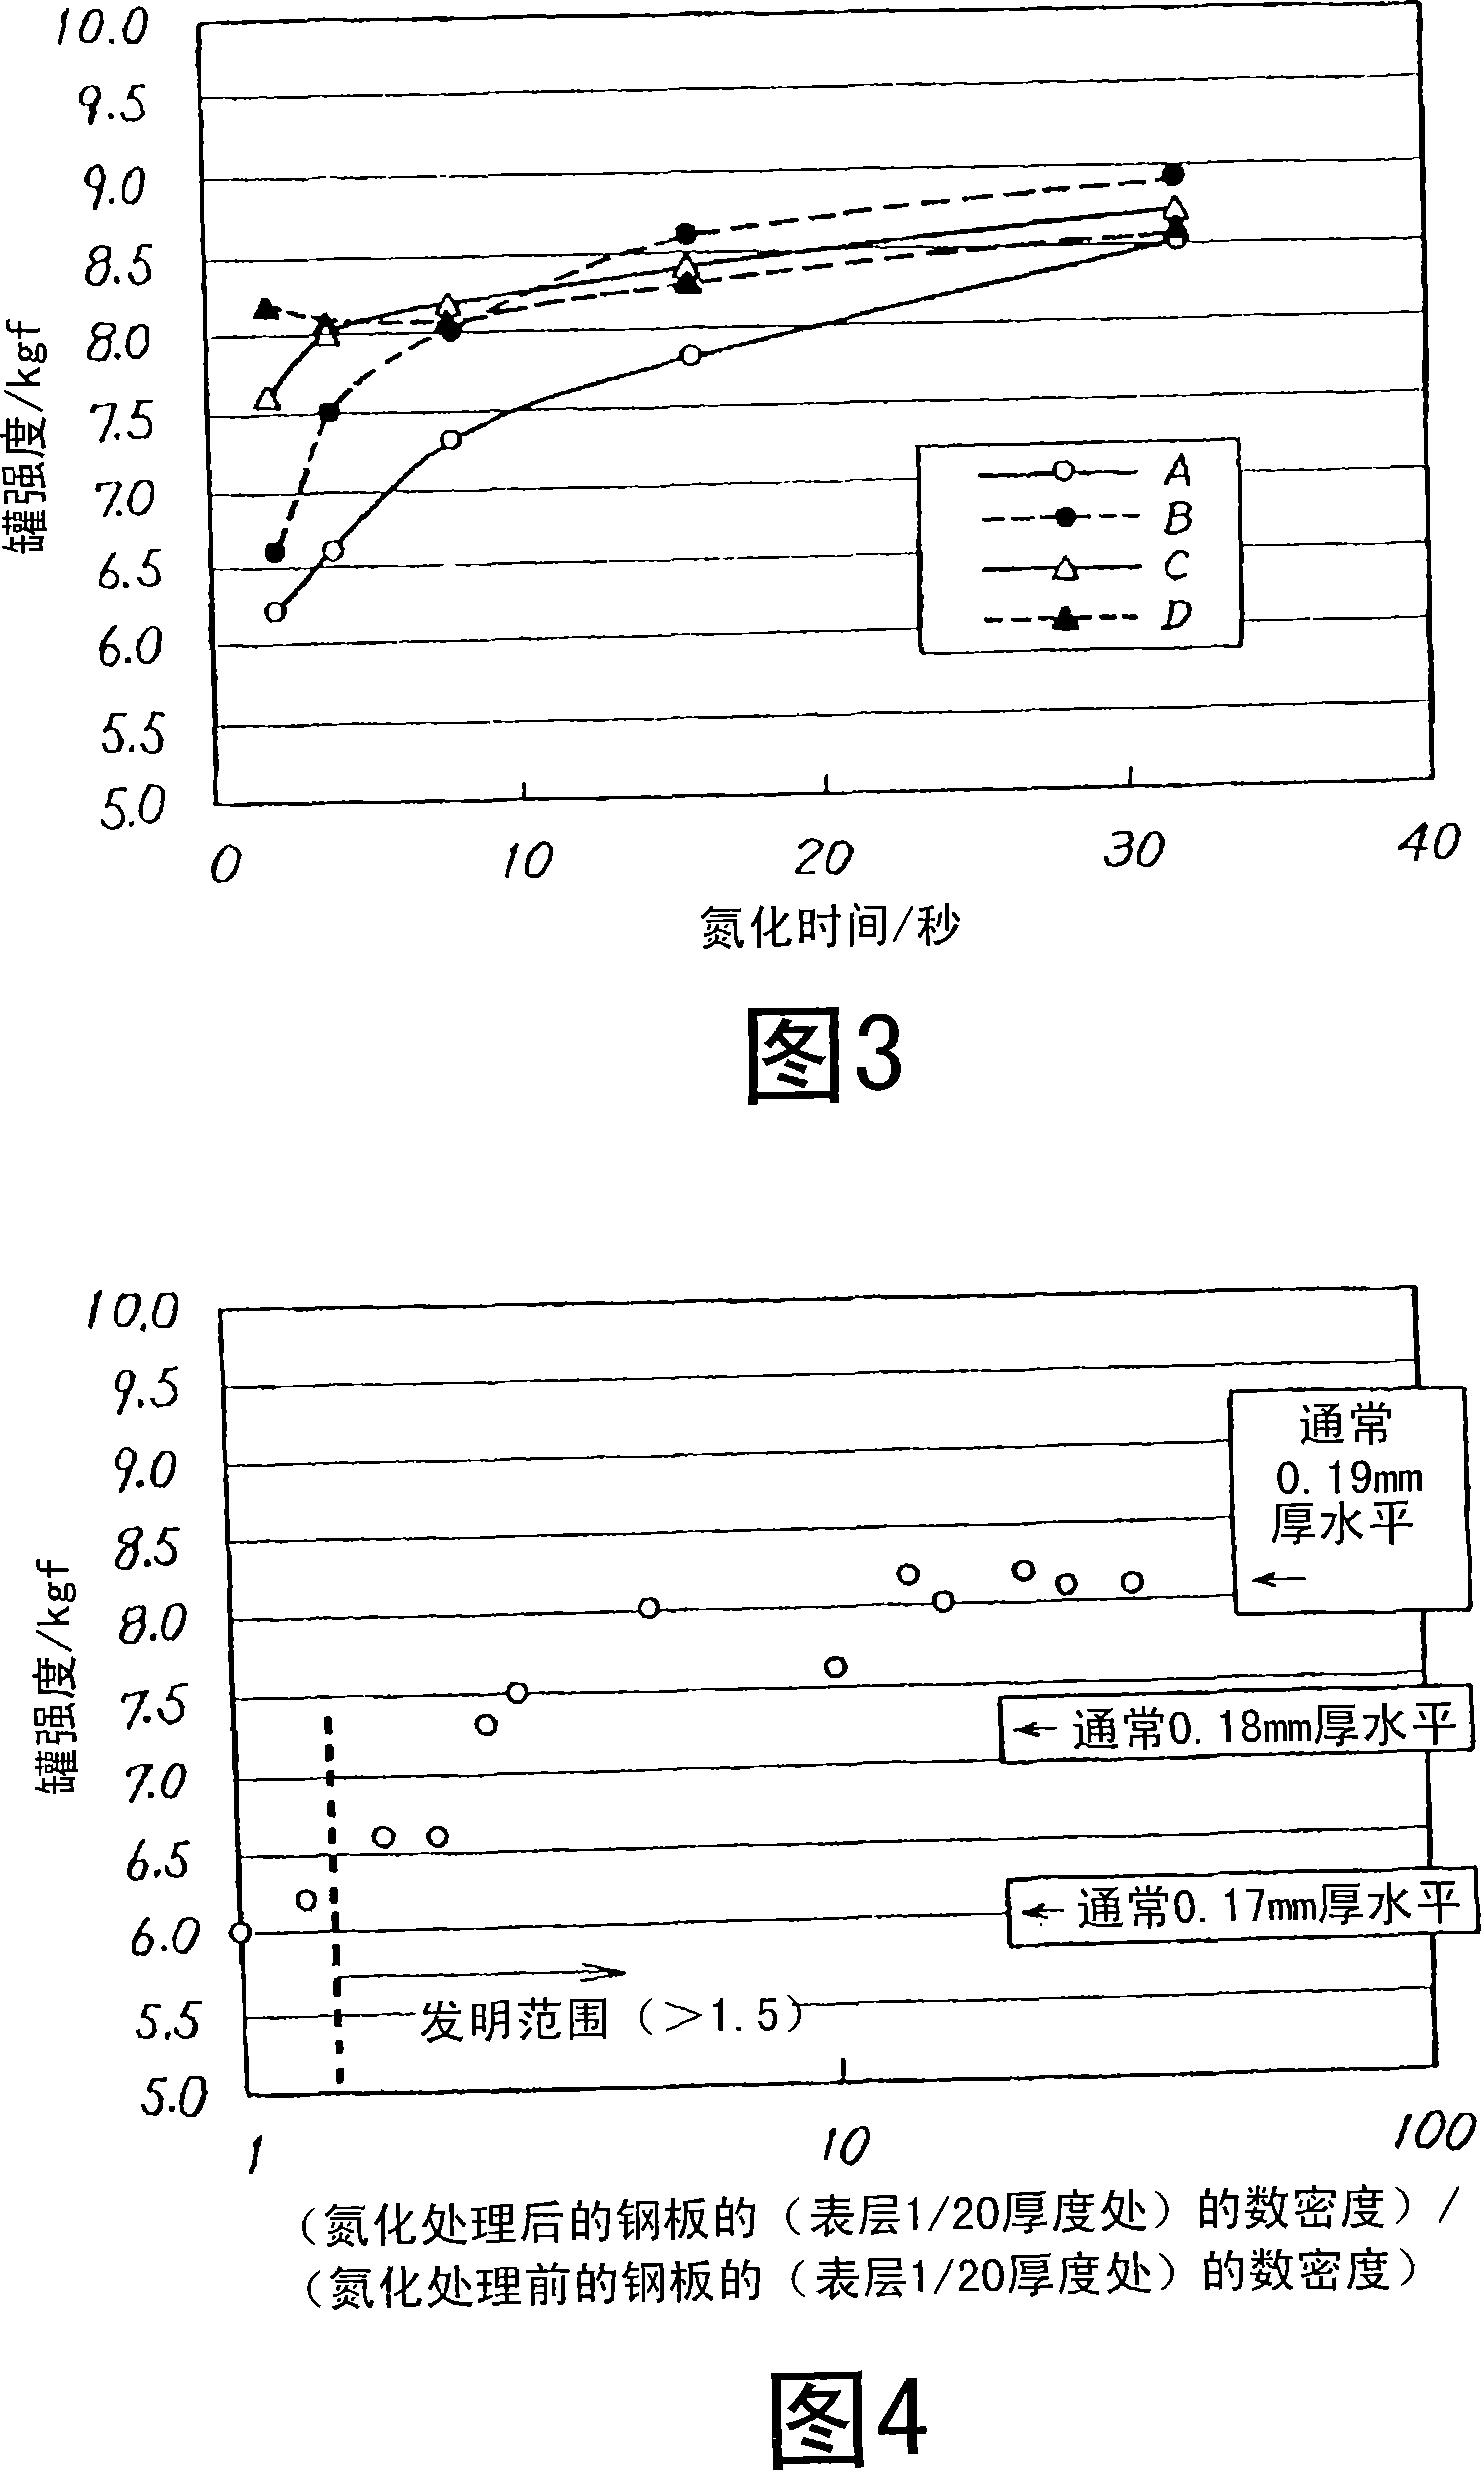 Steel sheet for extreme thin container and method for manufacturing the same